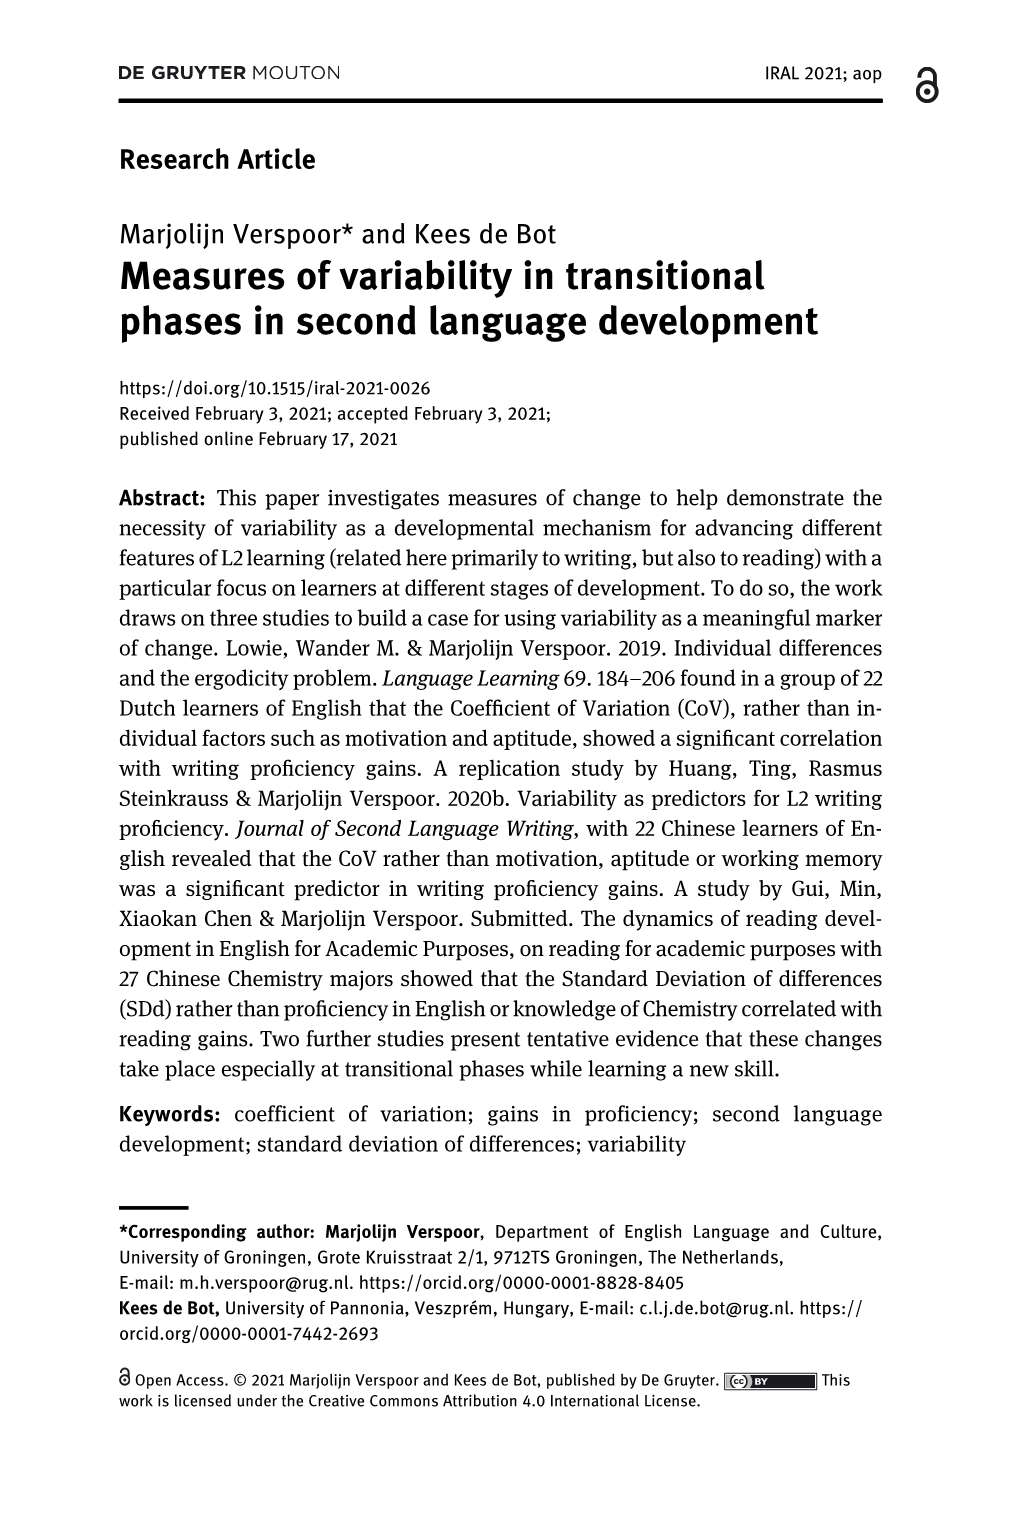 Measures of Variability in Transitional Phases in Second Language